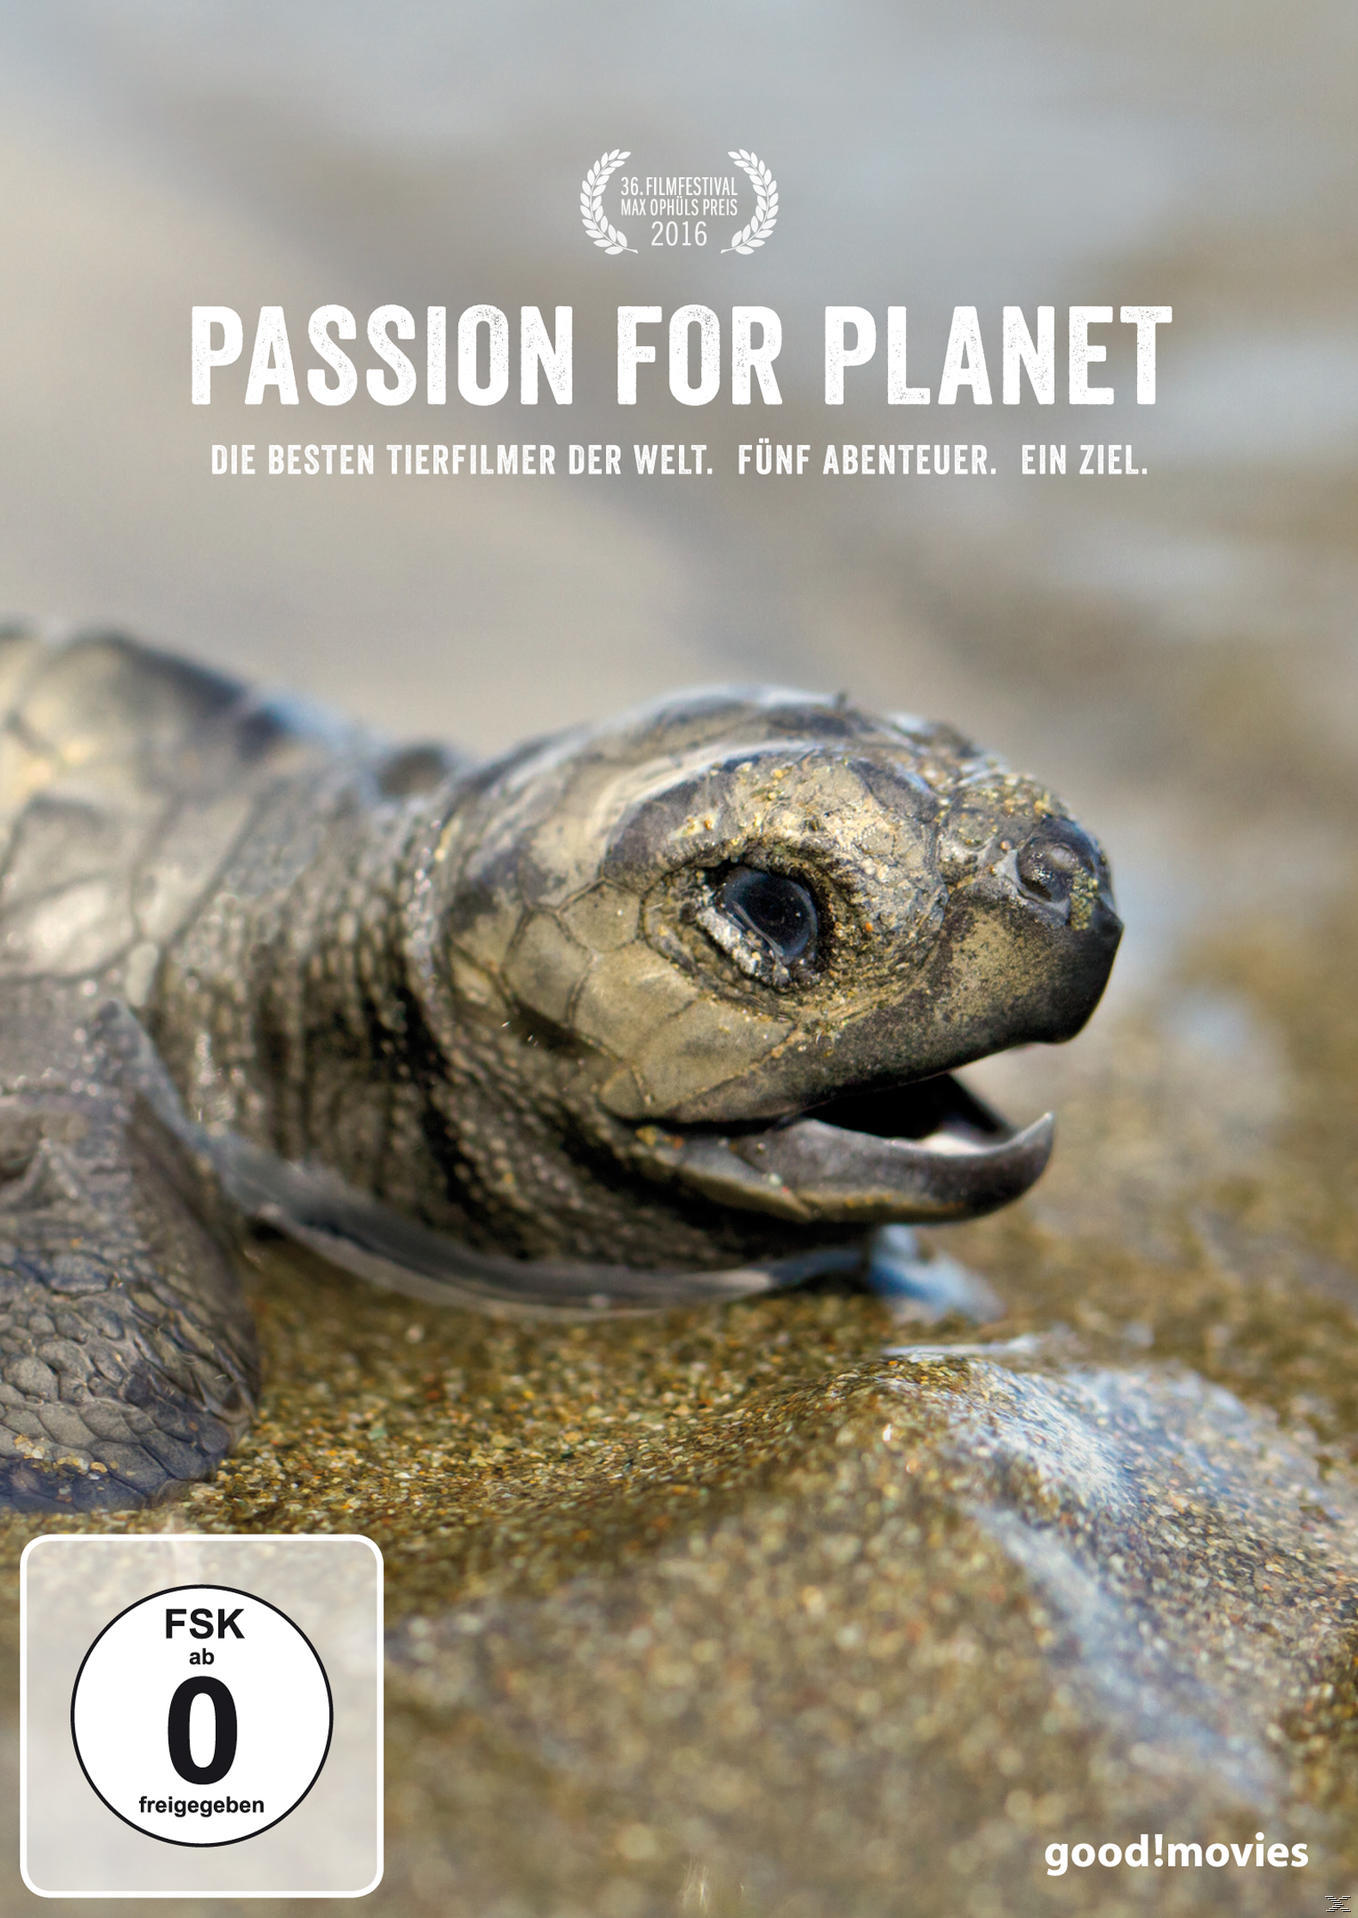 DVD for Passion Planet